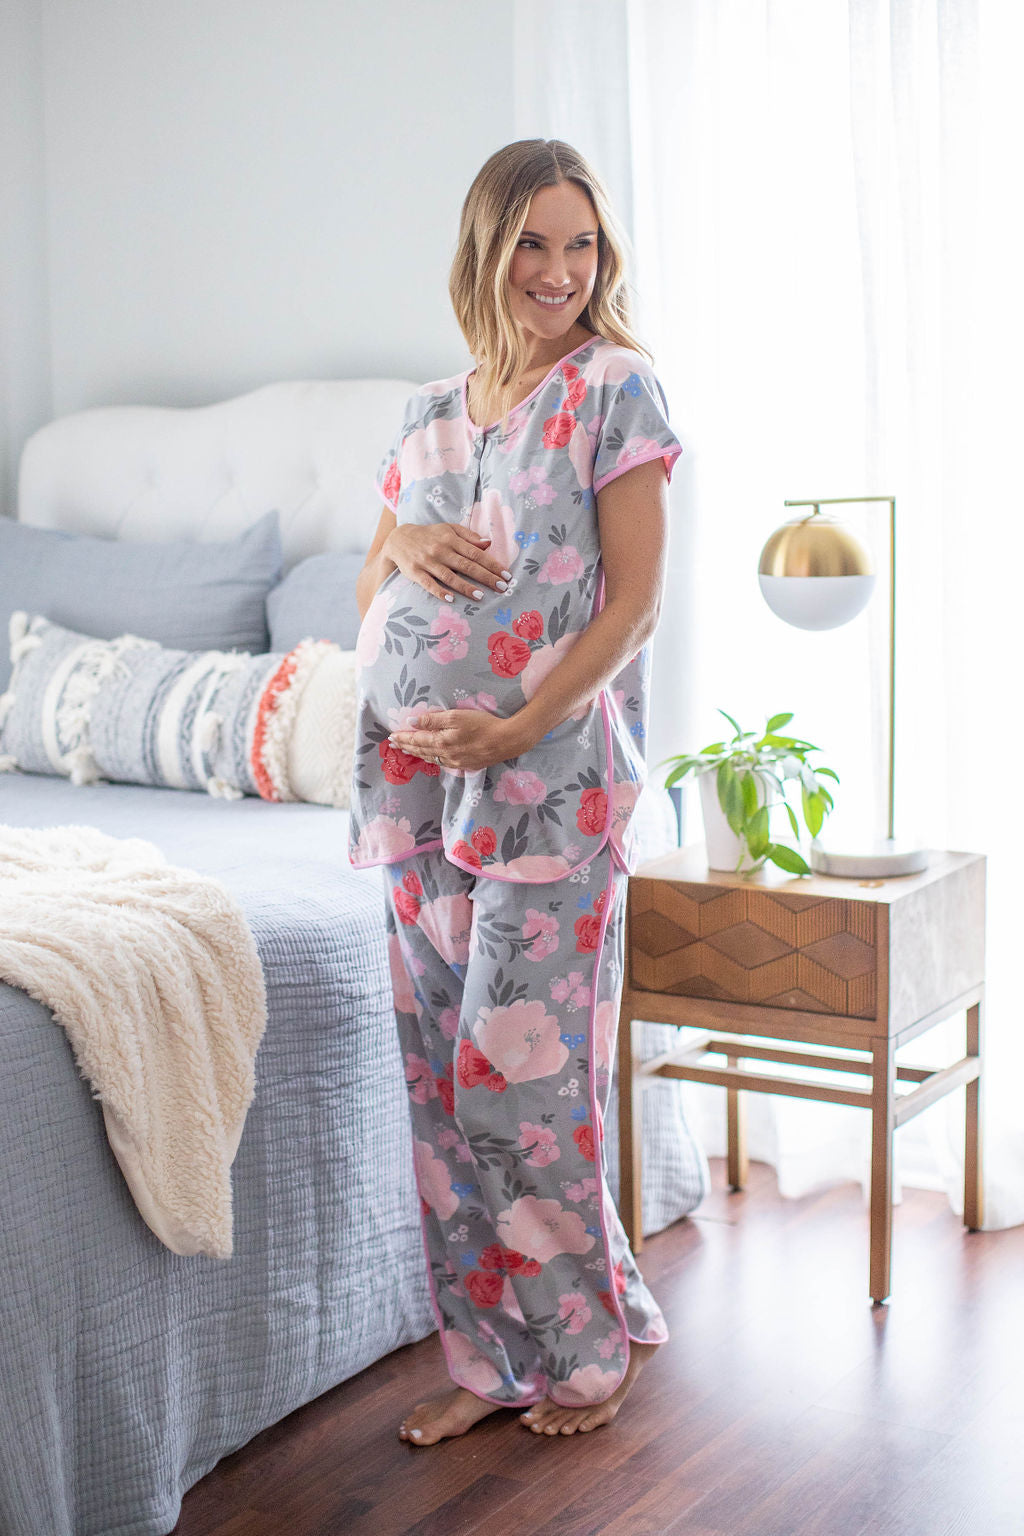 Sophie print with pint and red flowers against a grey background. Pink trim along dolphin hem. Maternity pajamas for mom with easy front snaps for breastfeeding baby. Perfect for pre and post pregnancy.